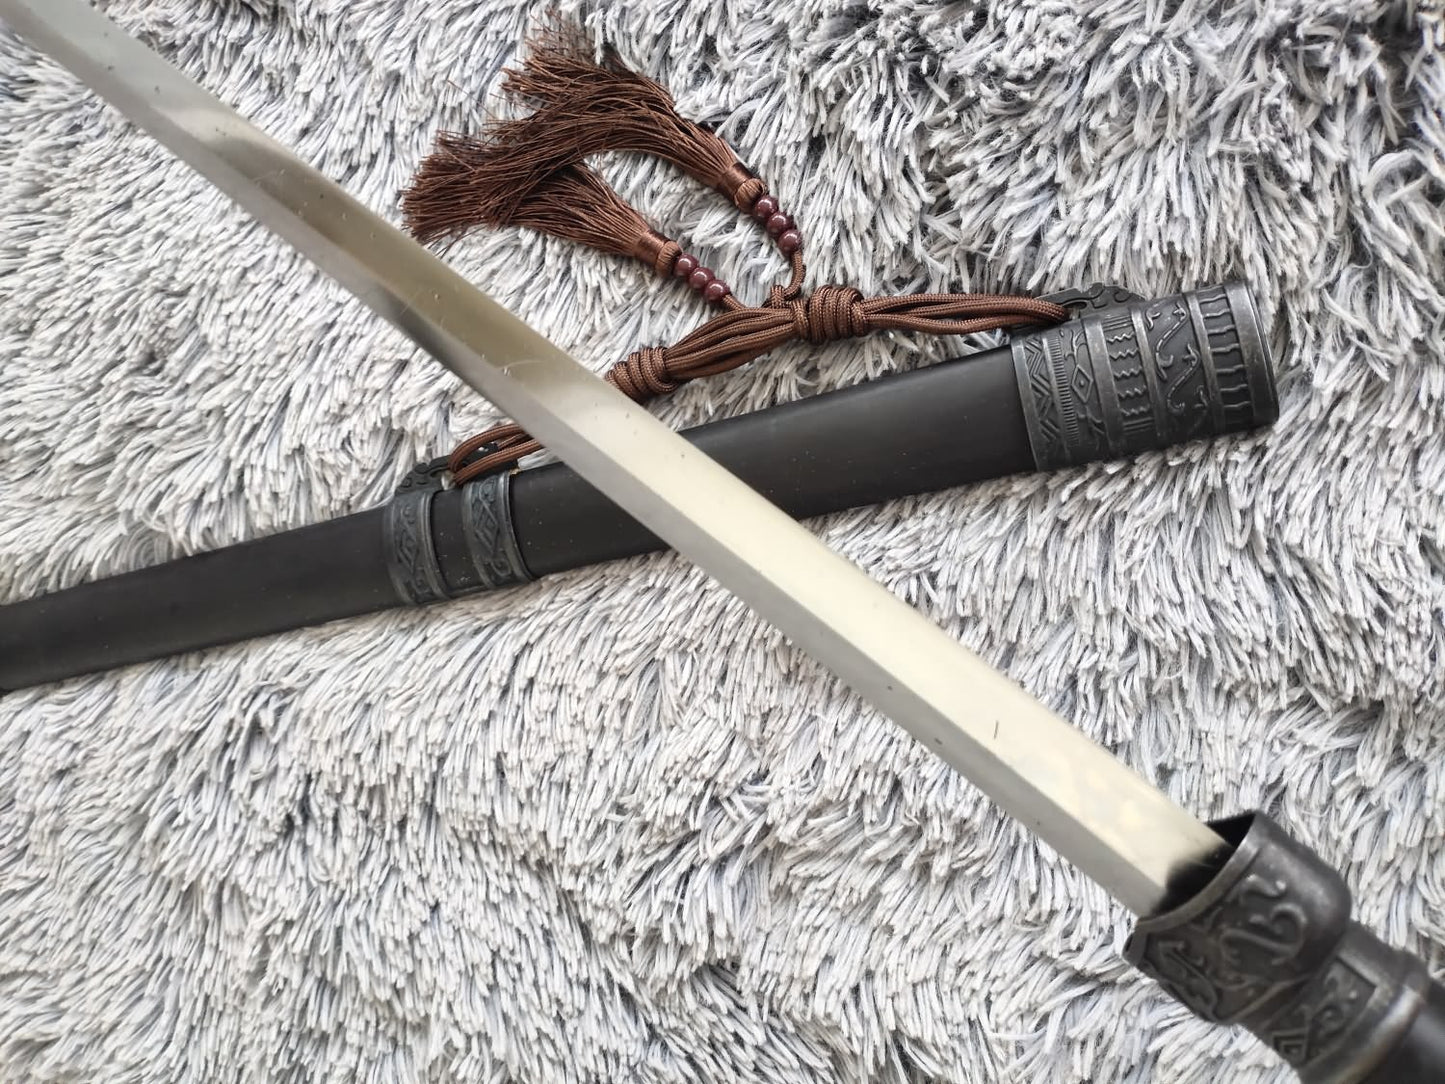 Handcrafted wolong jian Sword with Forged High Carbon Steel Blade and Alloy Fittings-Perfect for China kung fu